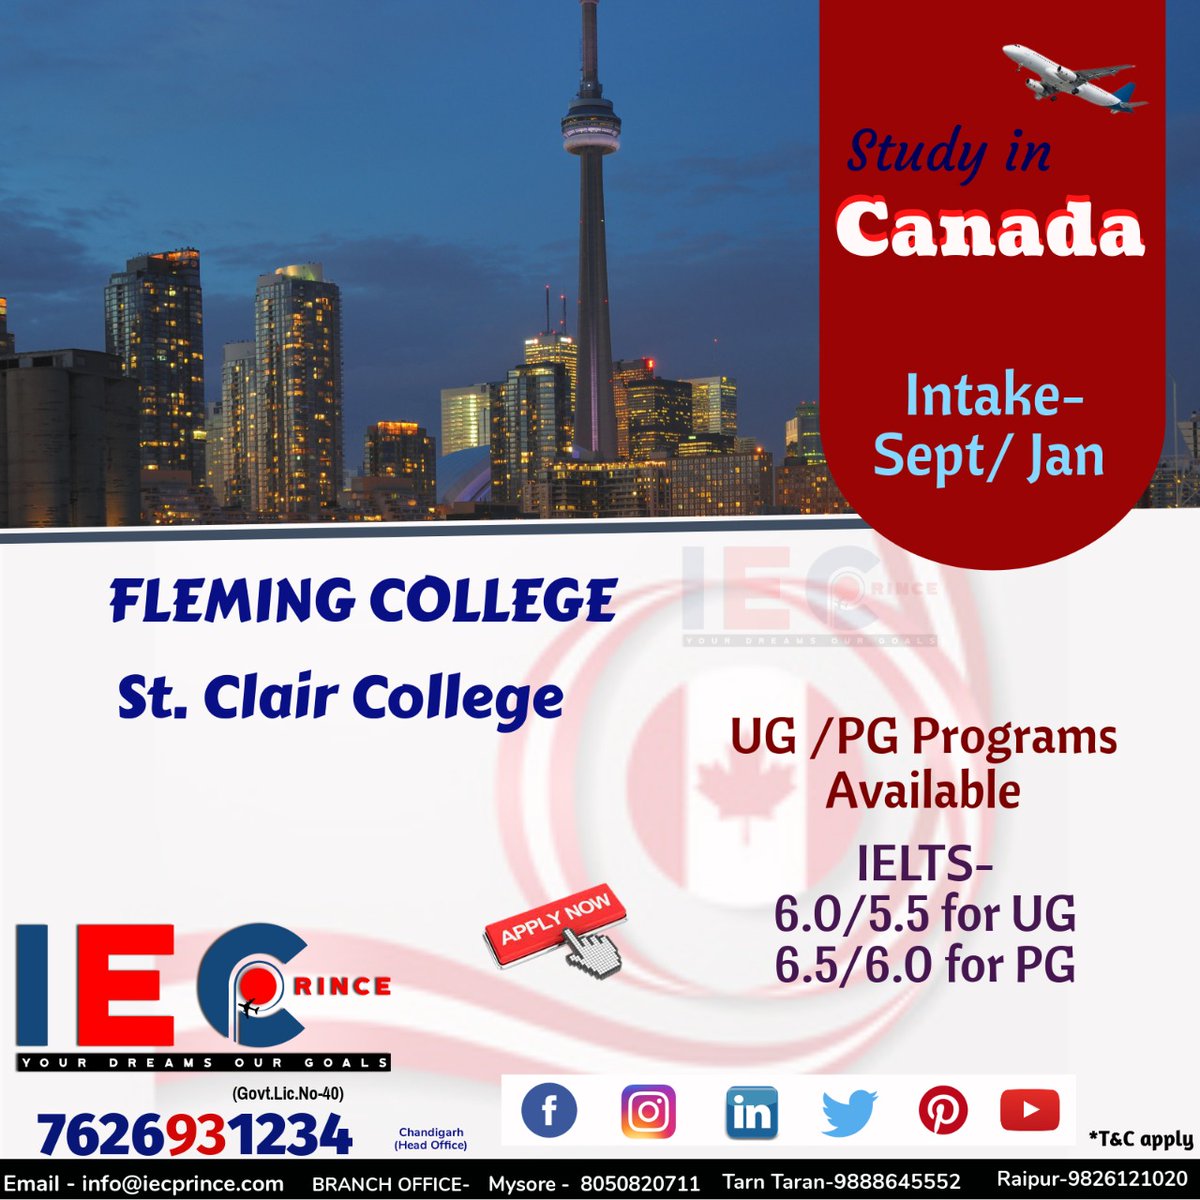 Study in Canada 
Fleming college 
St. Clair College 
Contact 7626931234 

#Canada #StudyAbroad  #StClairCollege #UGPrograms #PGPrograms #FlemingCollege #IecPrince #ConsultantInMohali